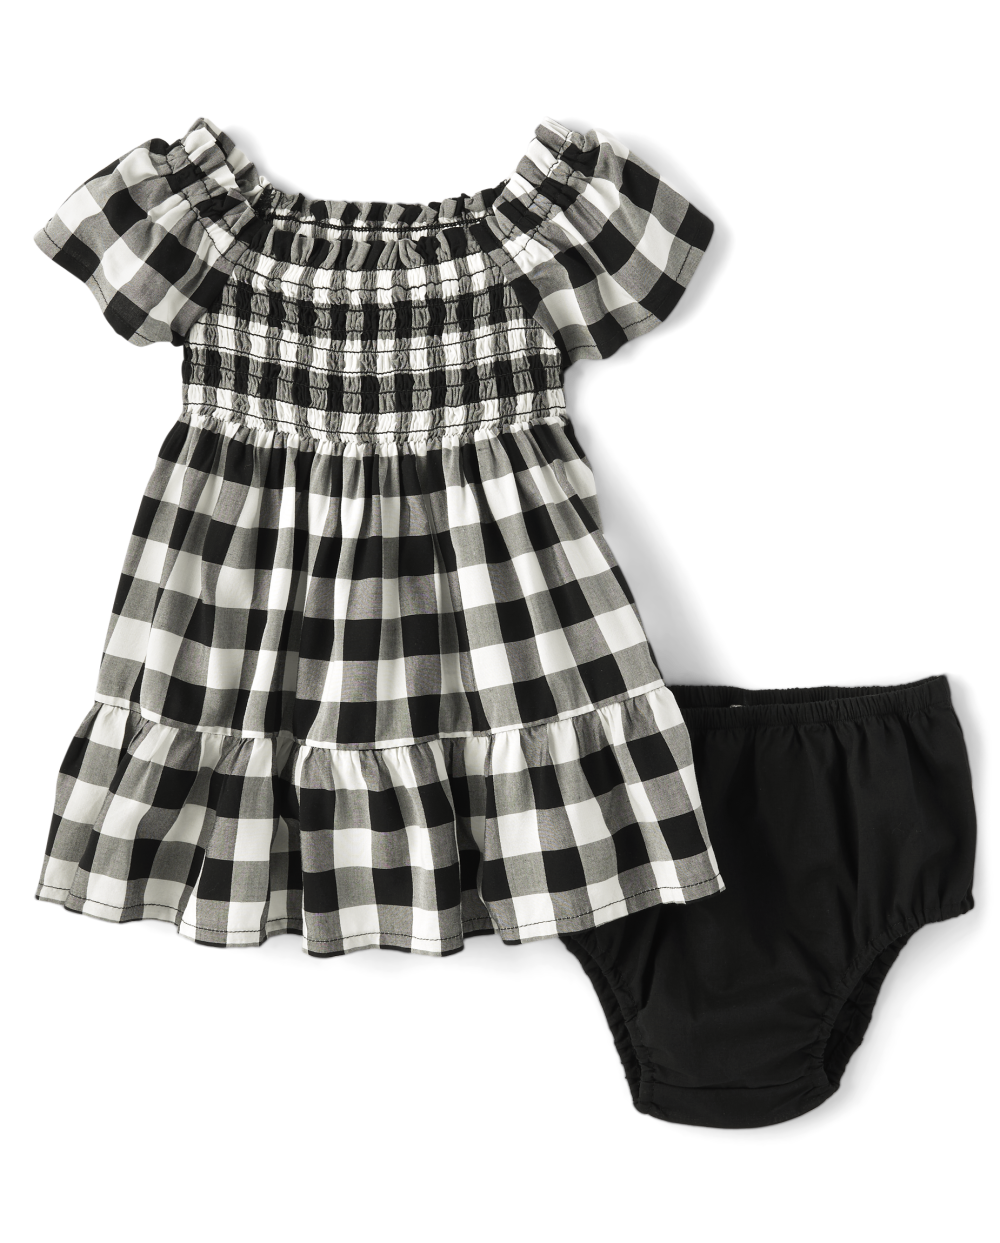 Toddler Short Sleeves Sleeves Above the Knee Elasticized Waistline Smocked Square Neck Checkered Gingham Print Dress With Ruffles